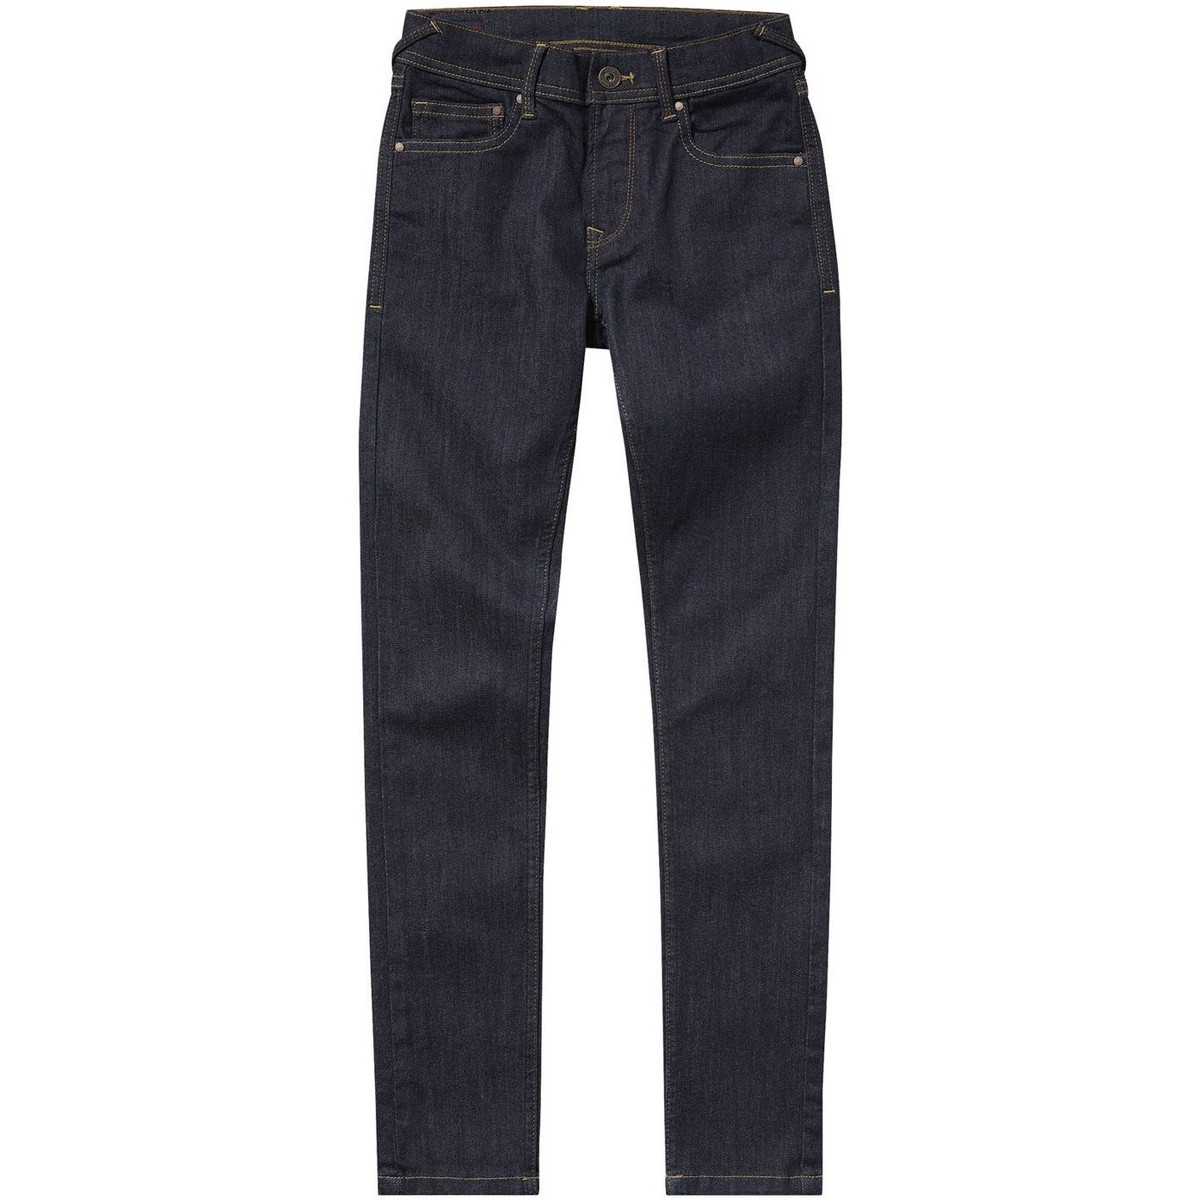 Jeans Pepe jeans 116192